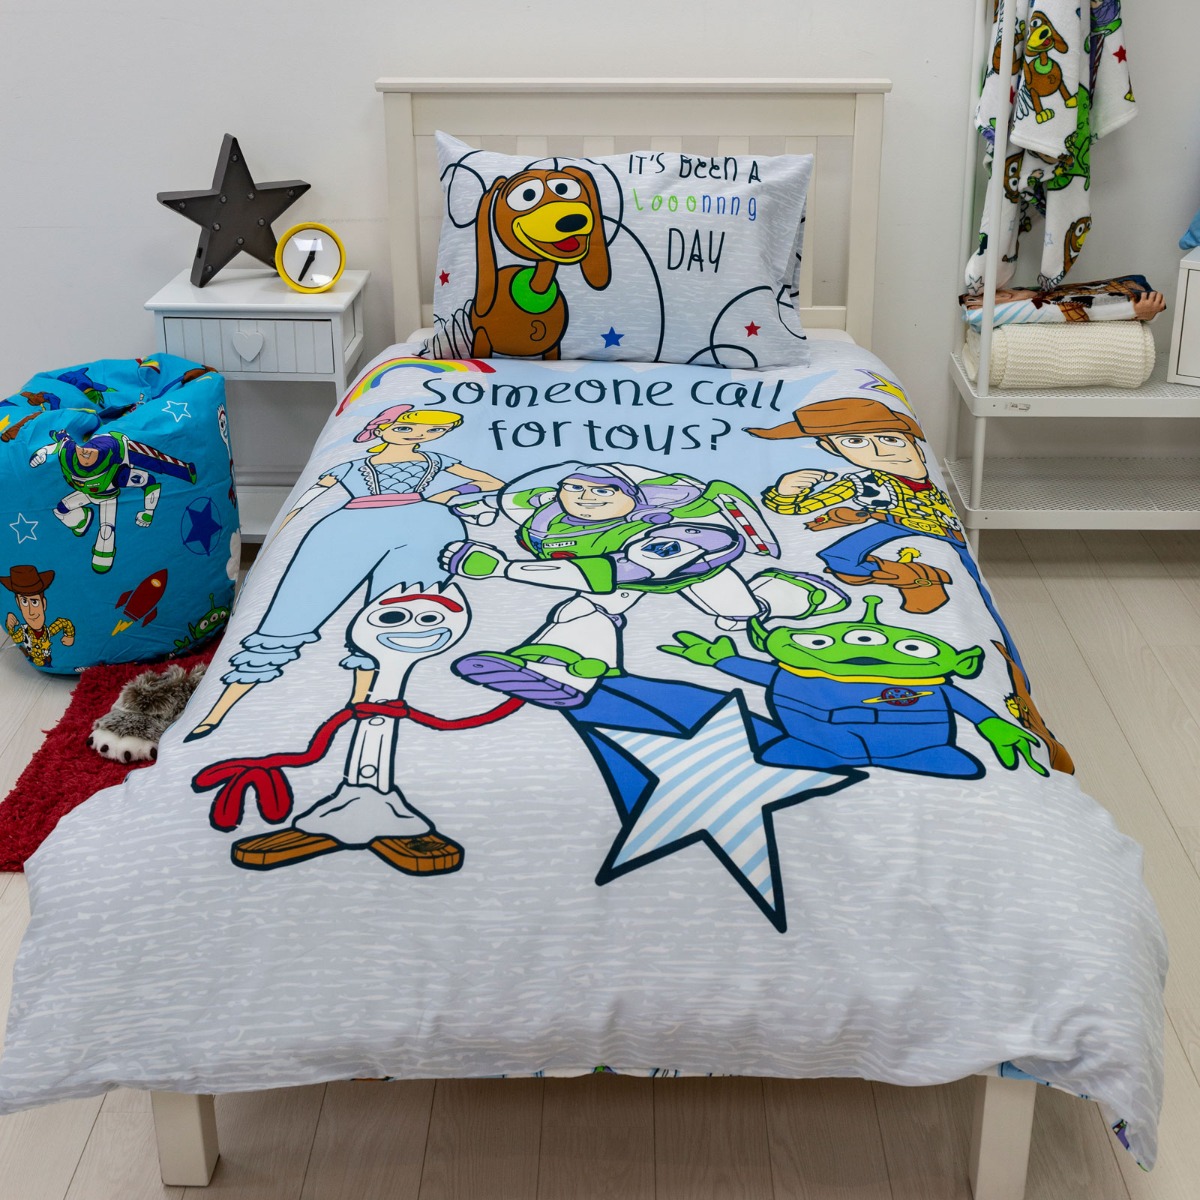 Toy Story 4 Roar Single Duvet Cover and Pillowcase Set